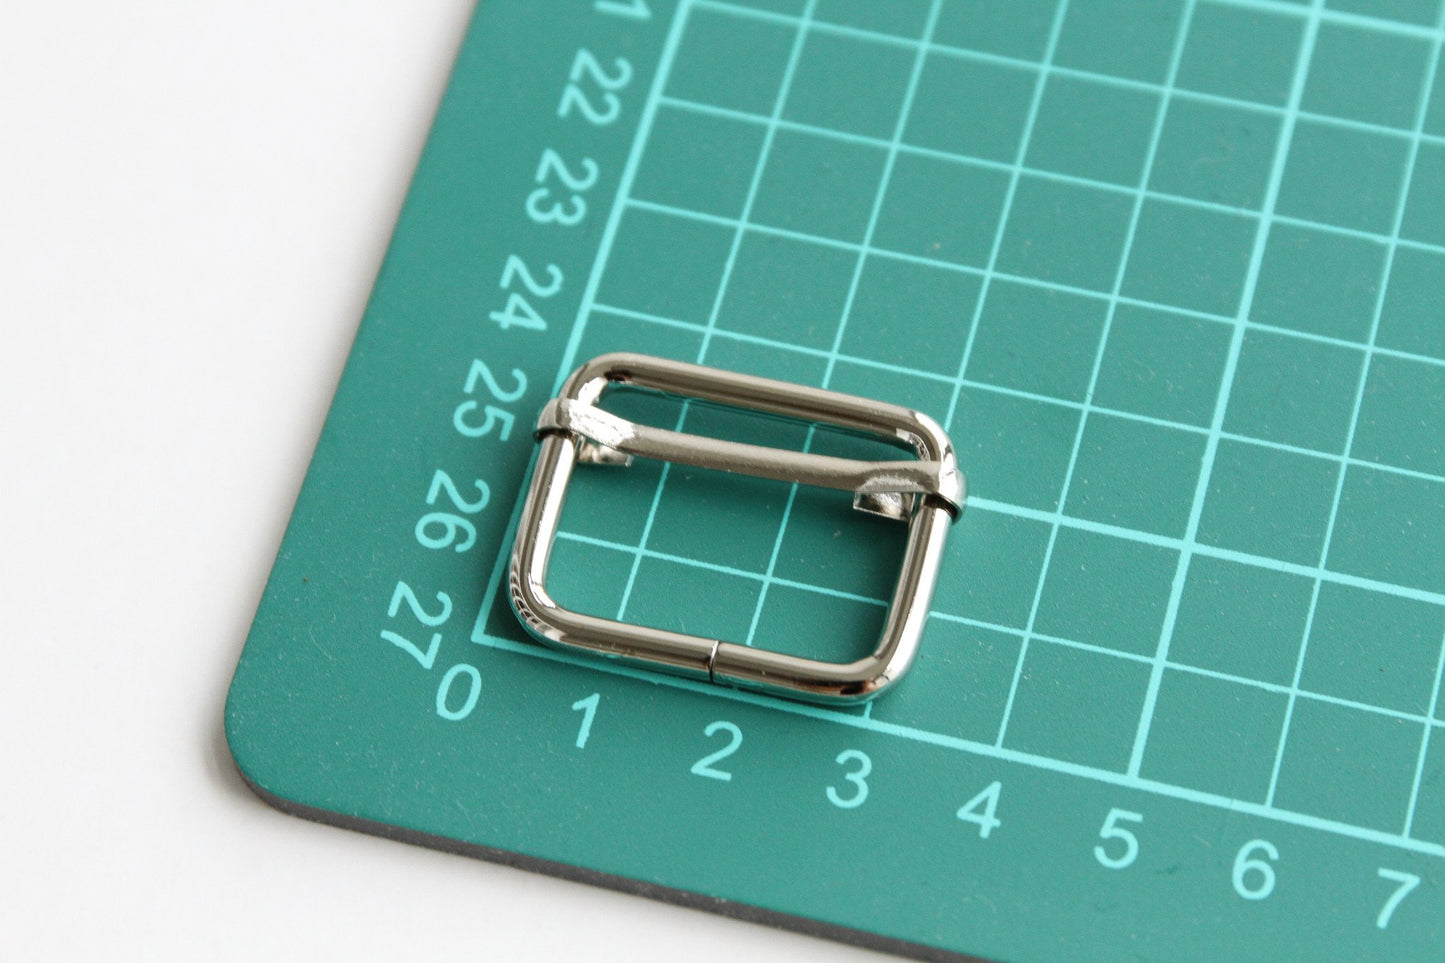 Rectangular Slider - 1 inch, One Movable Pin